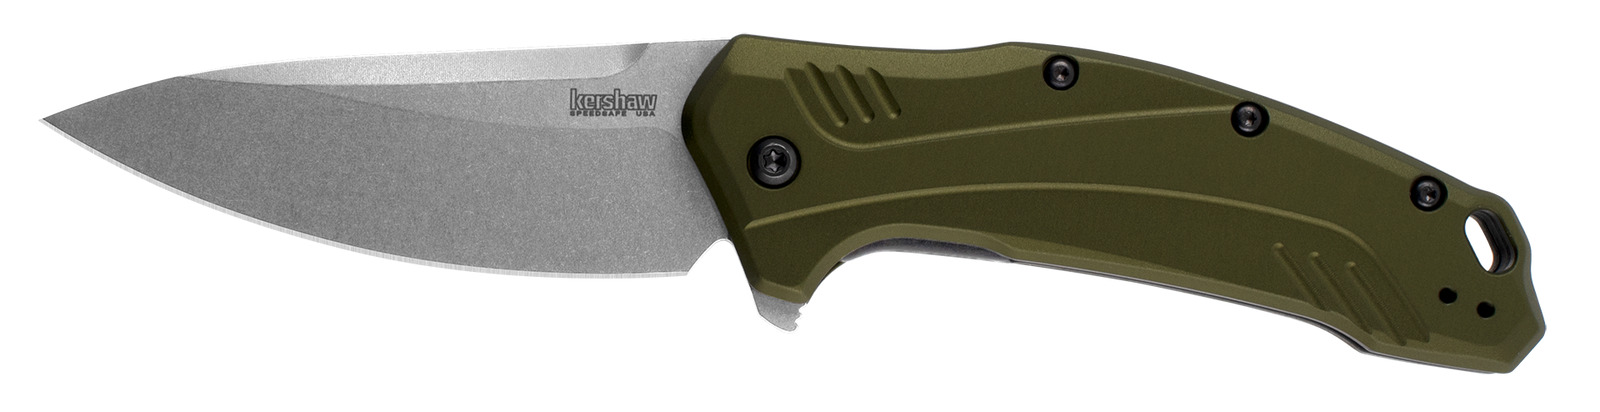 Kershaw Knives Link Liner Lock Olive Green Anodized Aluminum 20CV Steel 1776OLSW